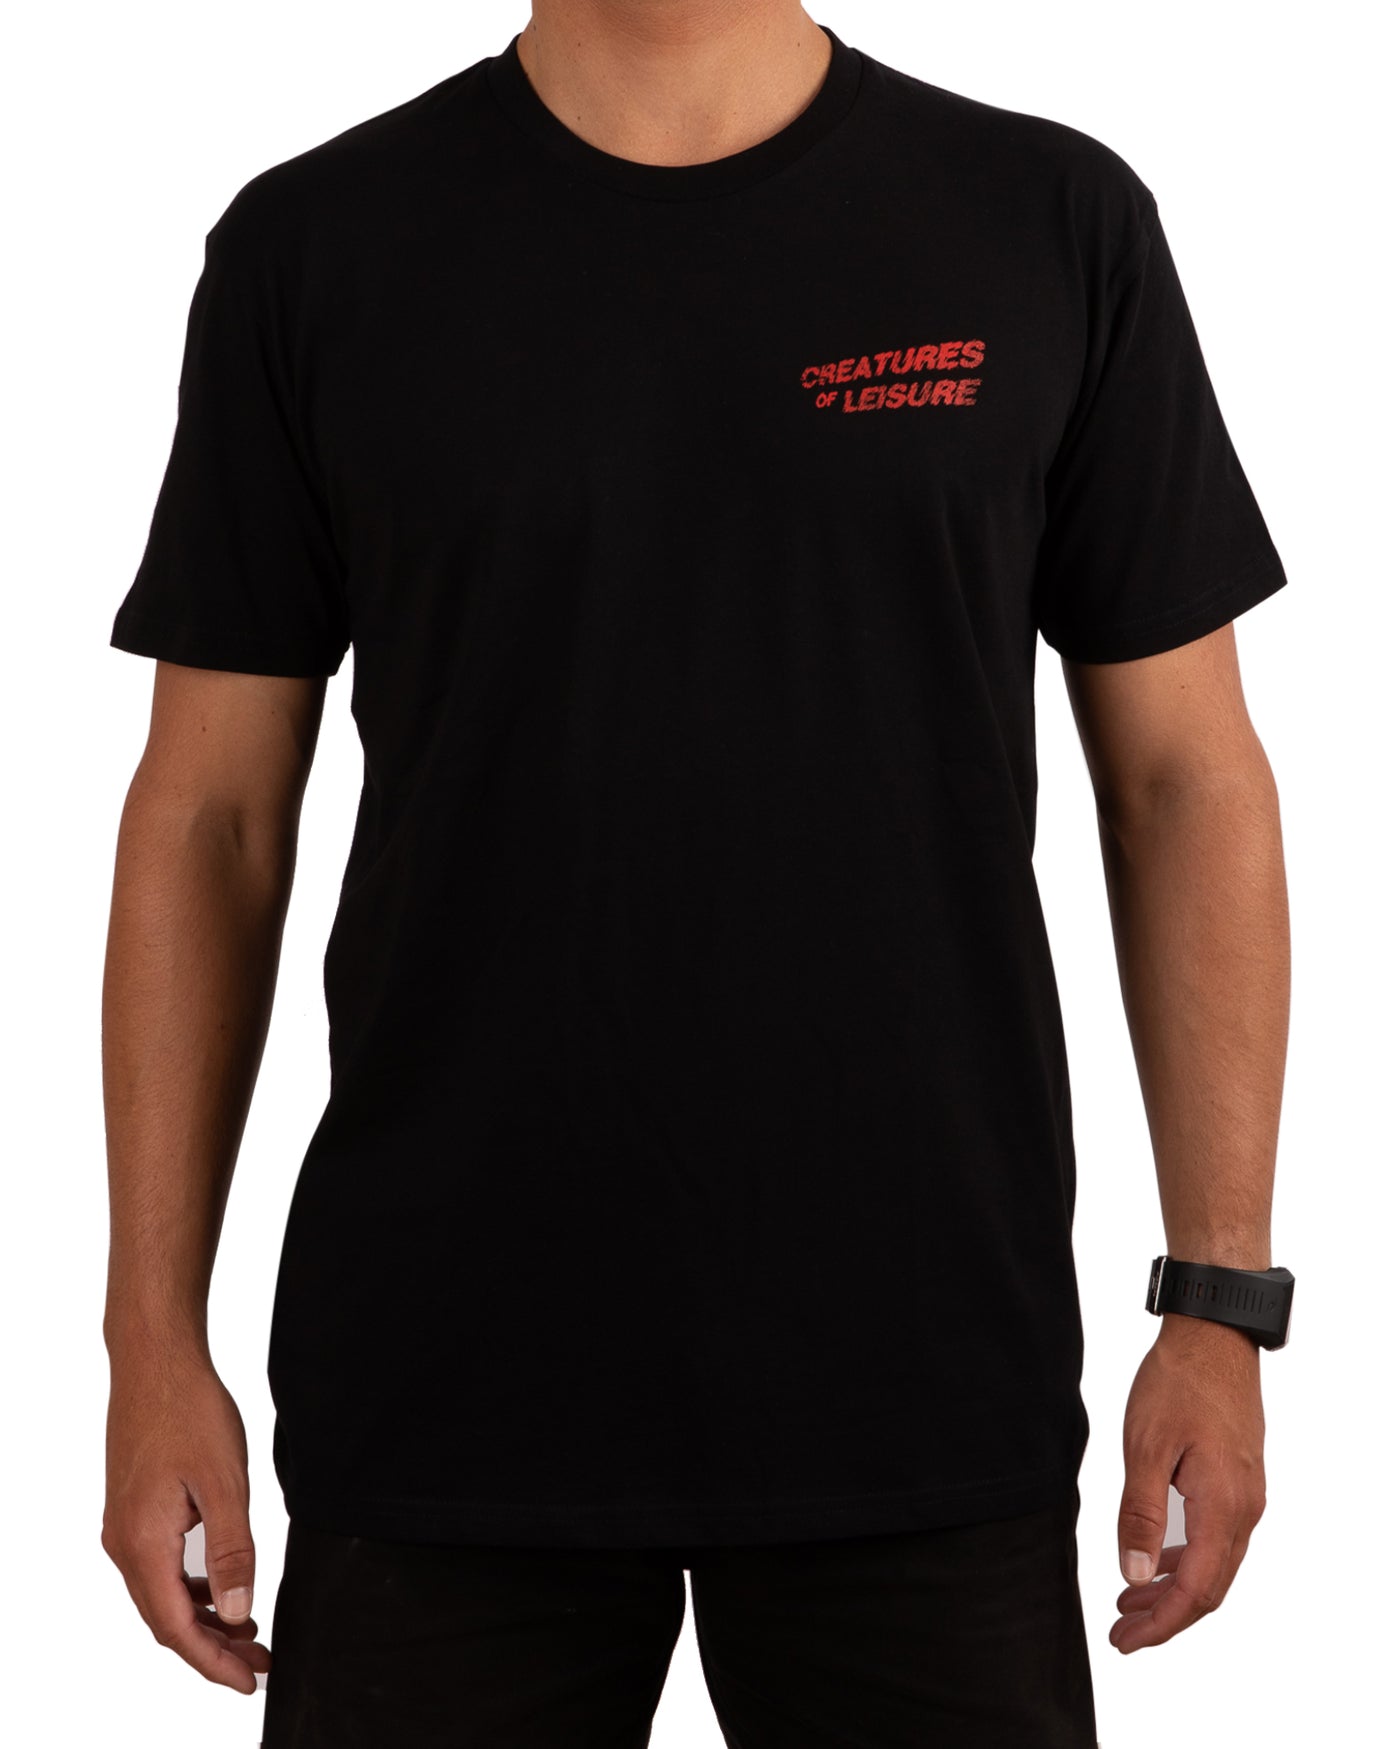 Ultimate Protection Tee : Black